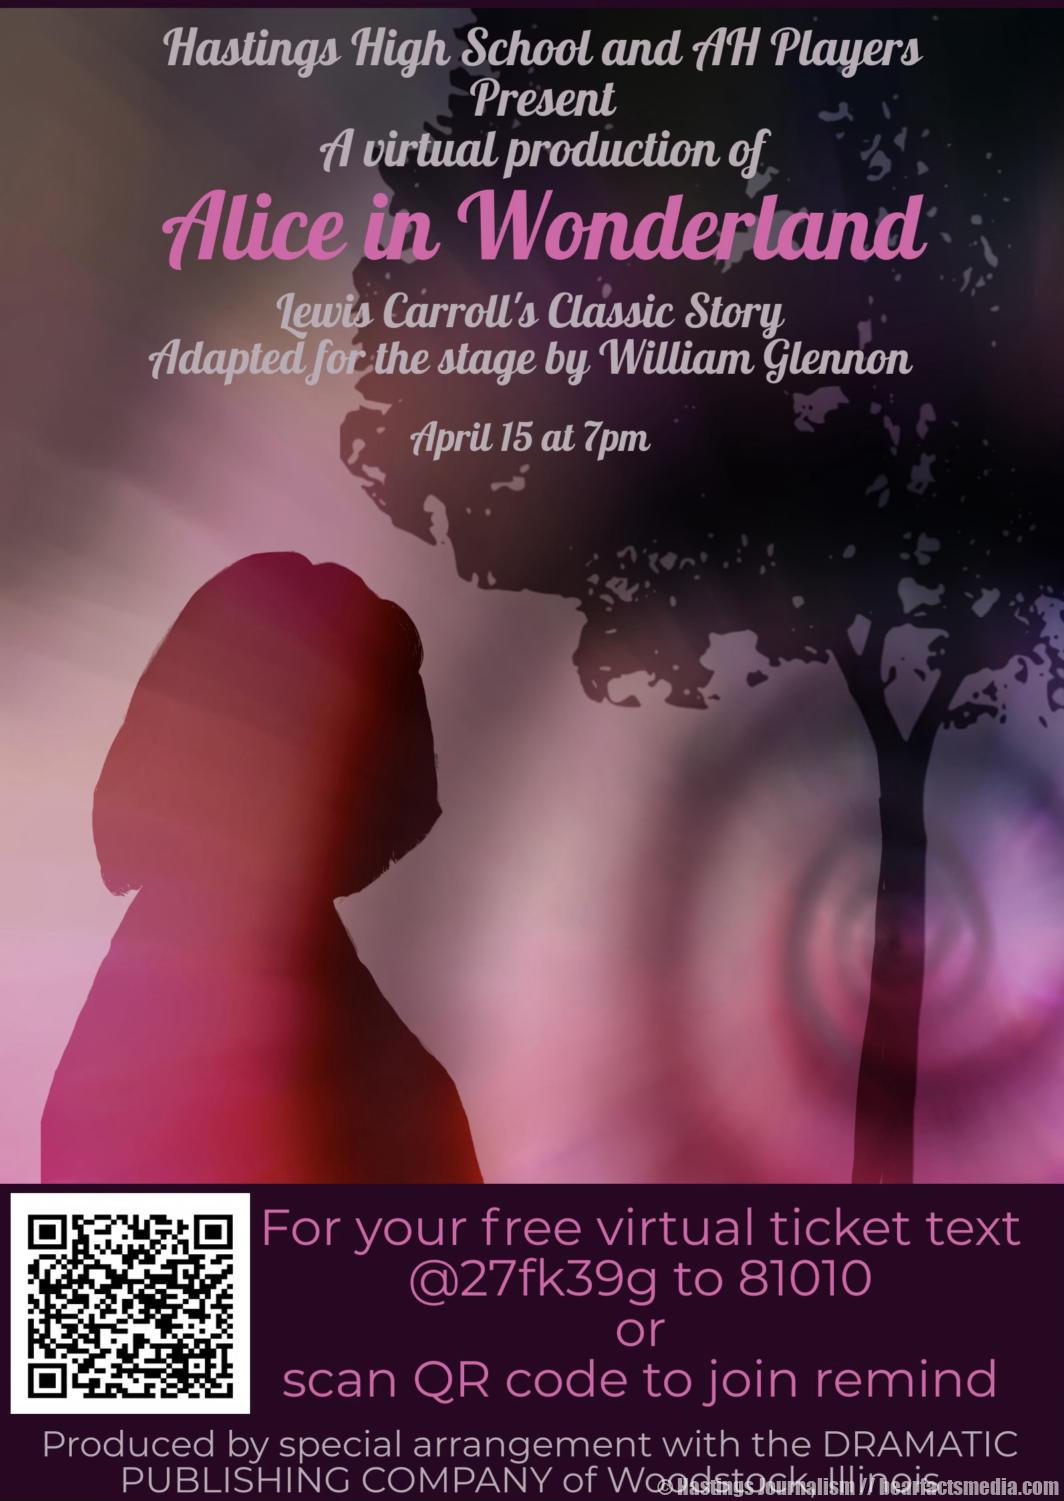 A virtual production of Alice in Wonderland April 15 at 7p.m.